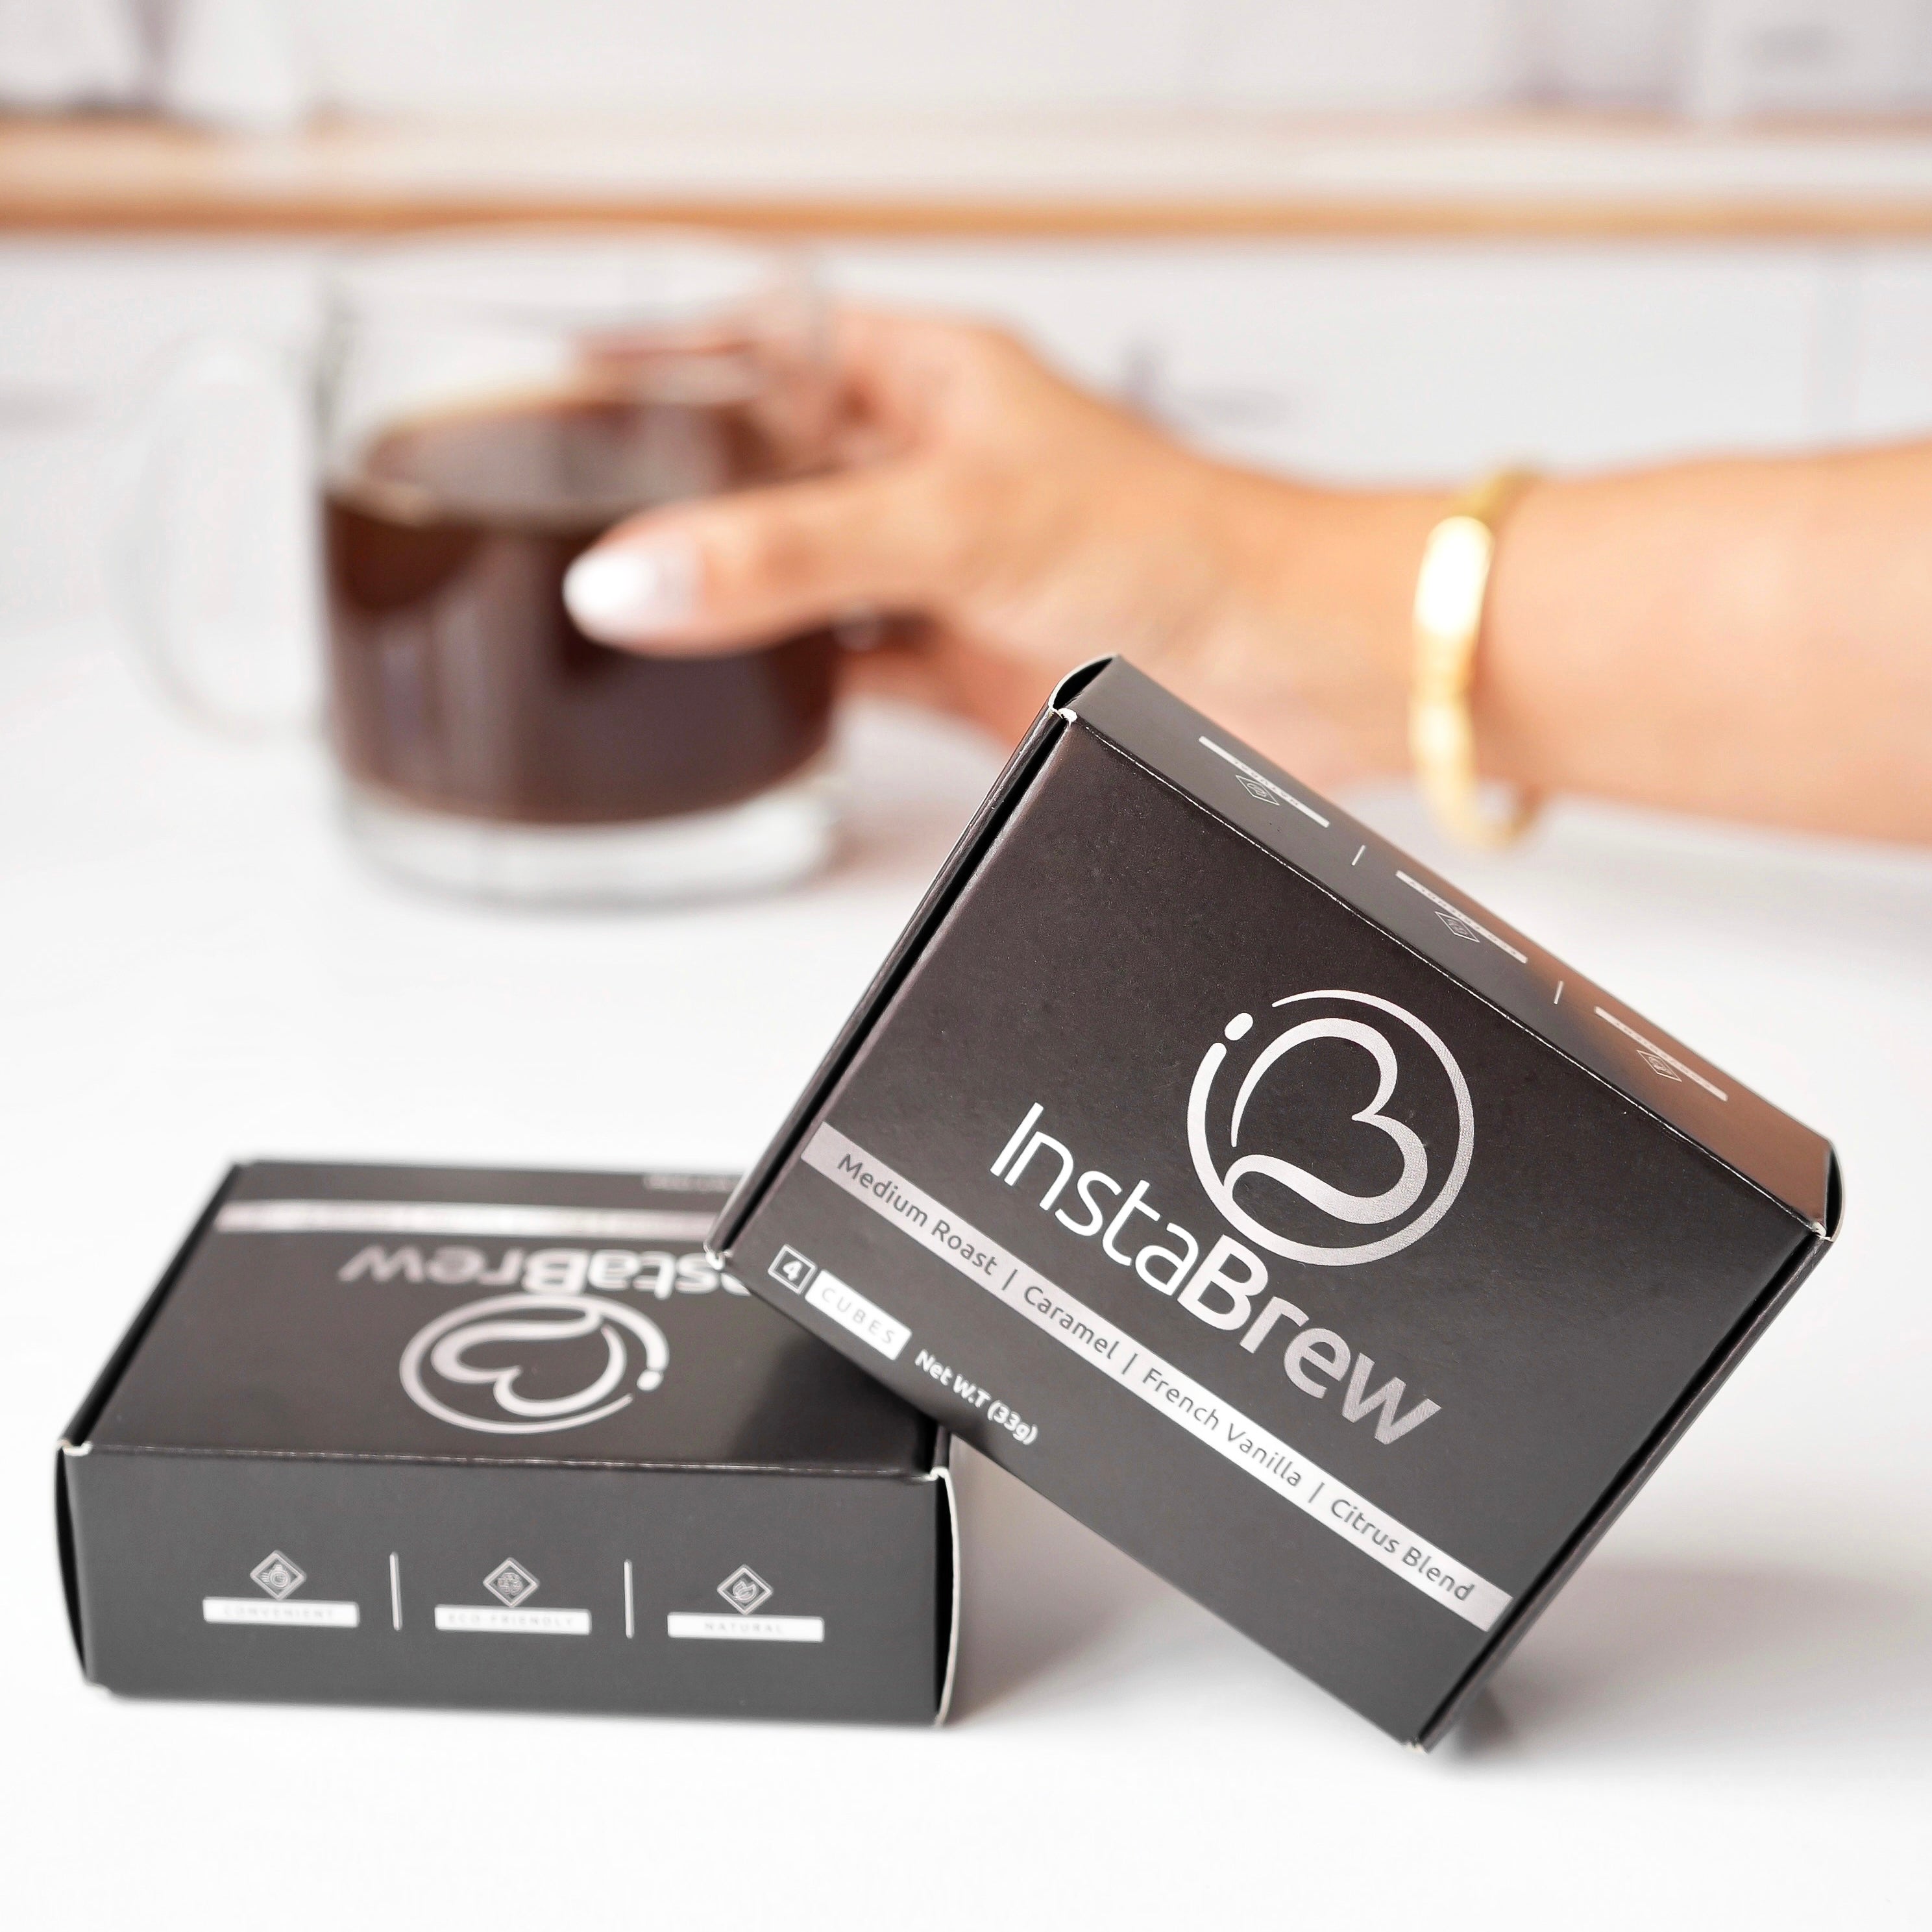 Possible FREE InstaBrew Instant Coffee and Tea Cube Samples